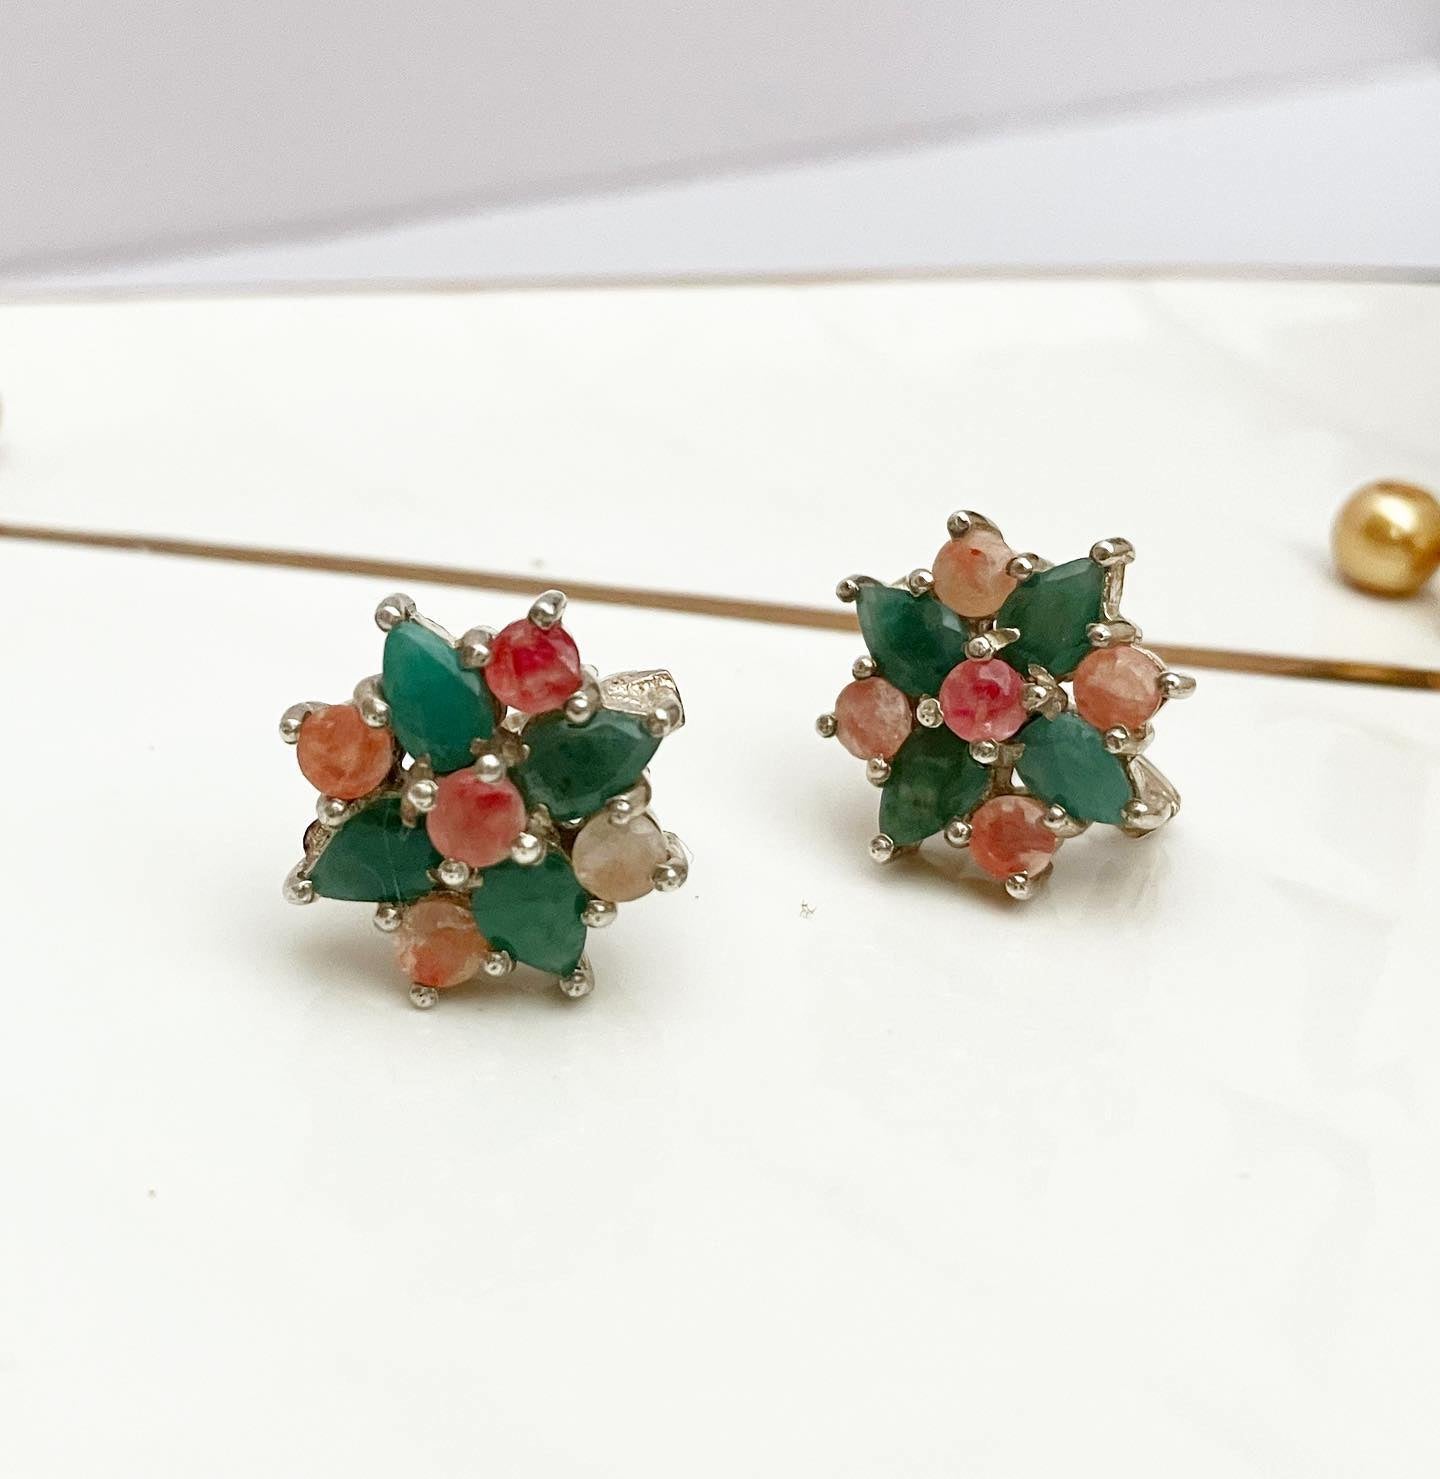 Earrings in 925 sterling silver with emerald and rubies.